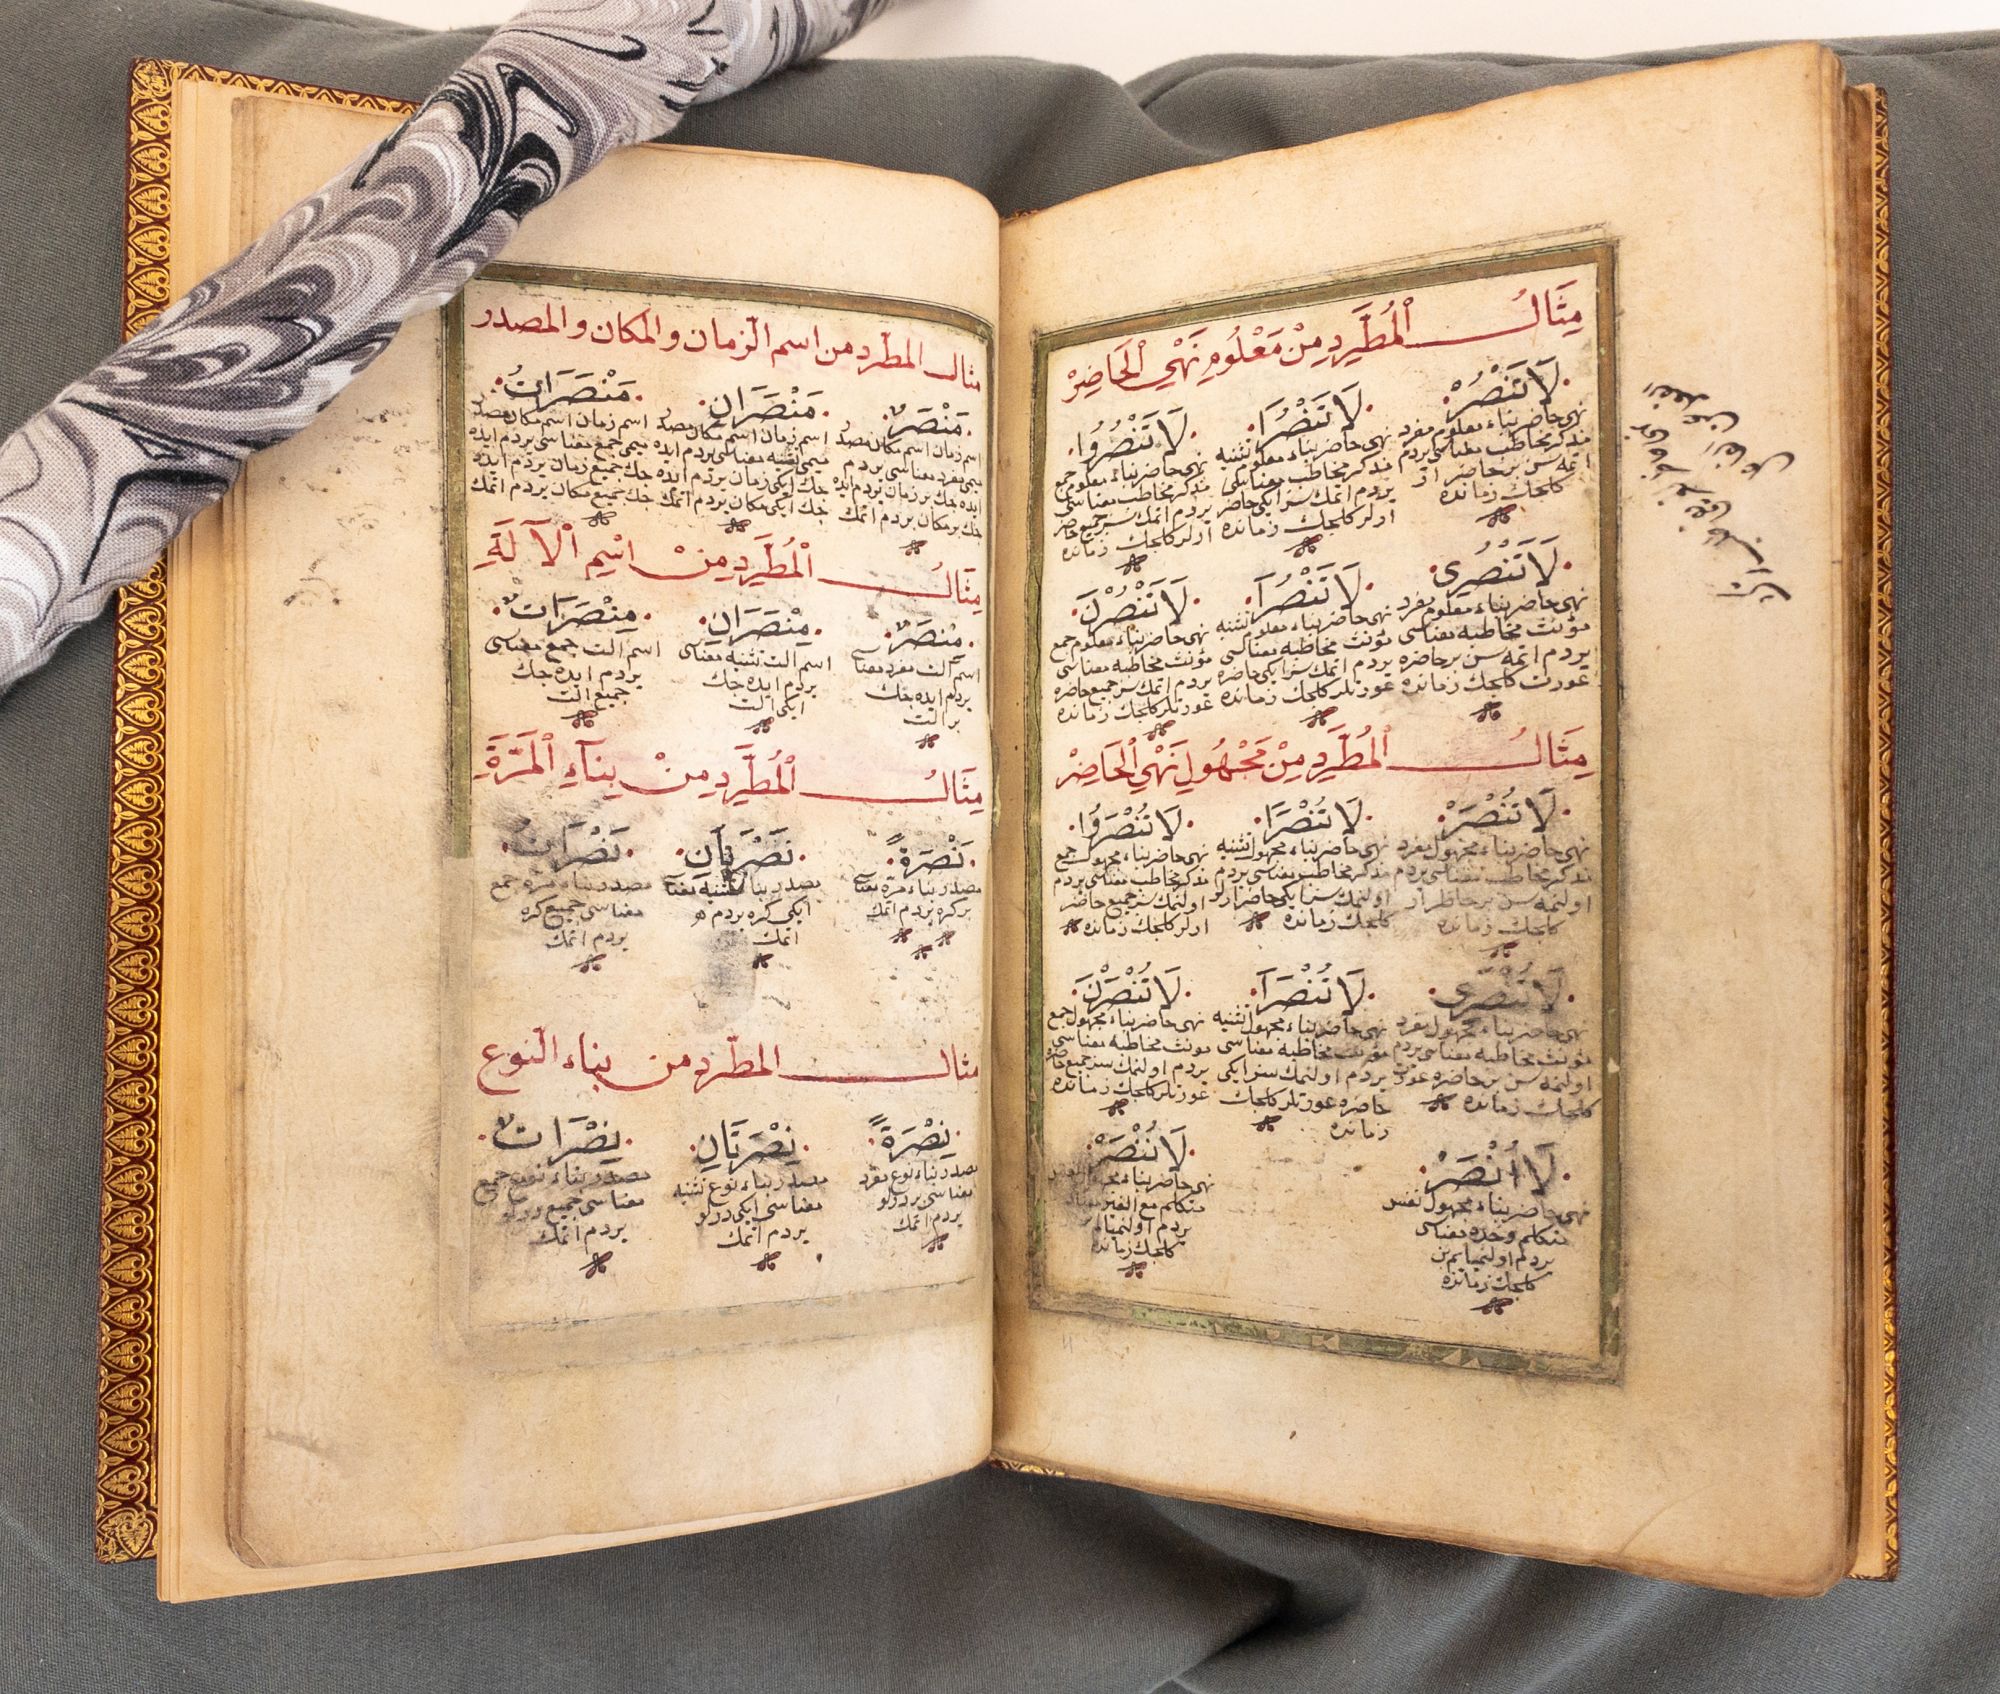 Product Image for AL-AMTHILA AL-MUKHTALIFA [Table of General Examples of Arabic Grammatical Rules]